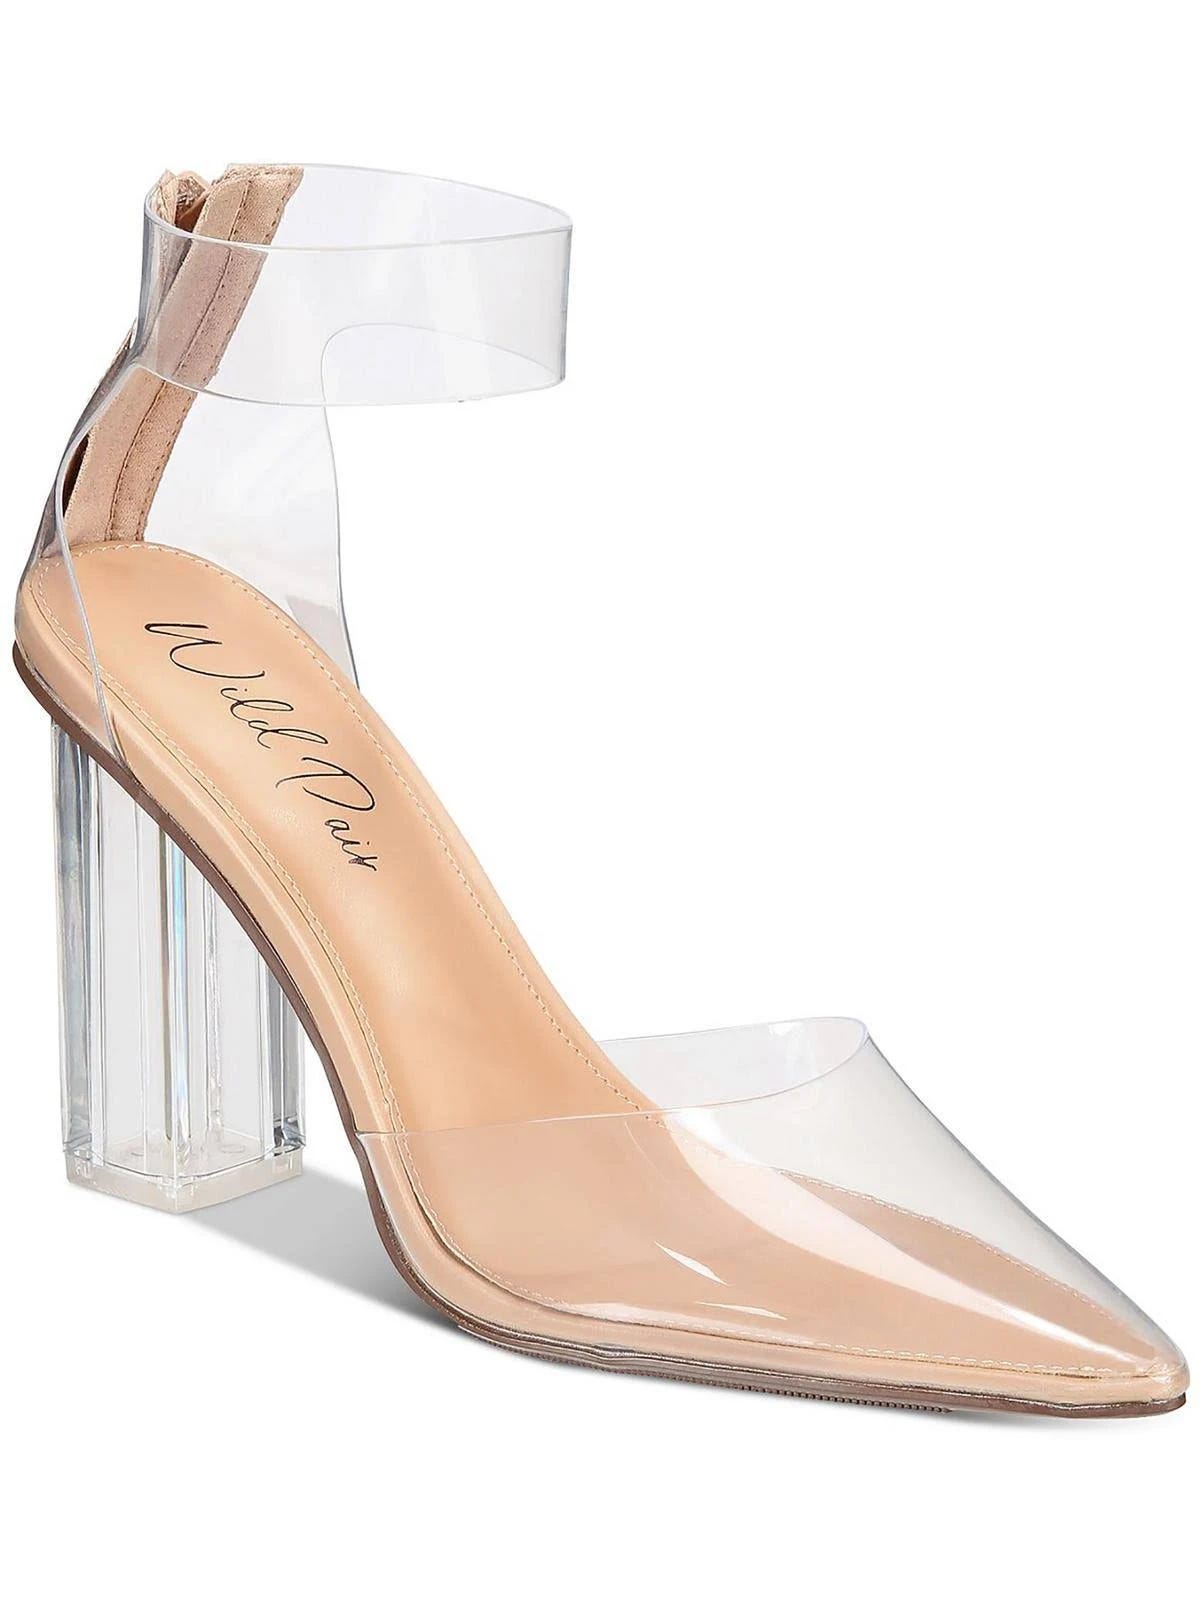 Translucent Pumps with Pointed Toes - Wild Pair Dellie | Image